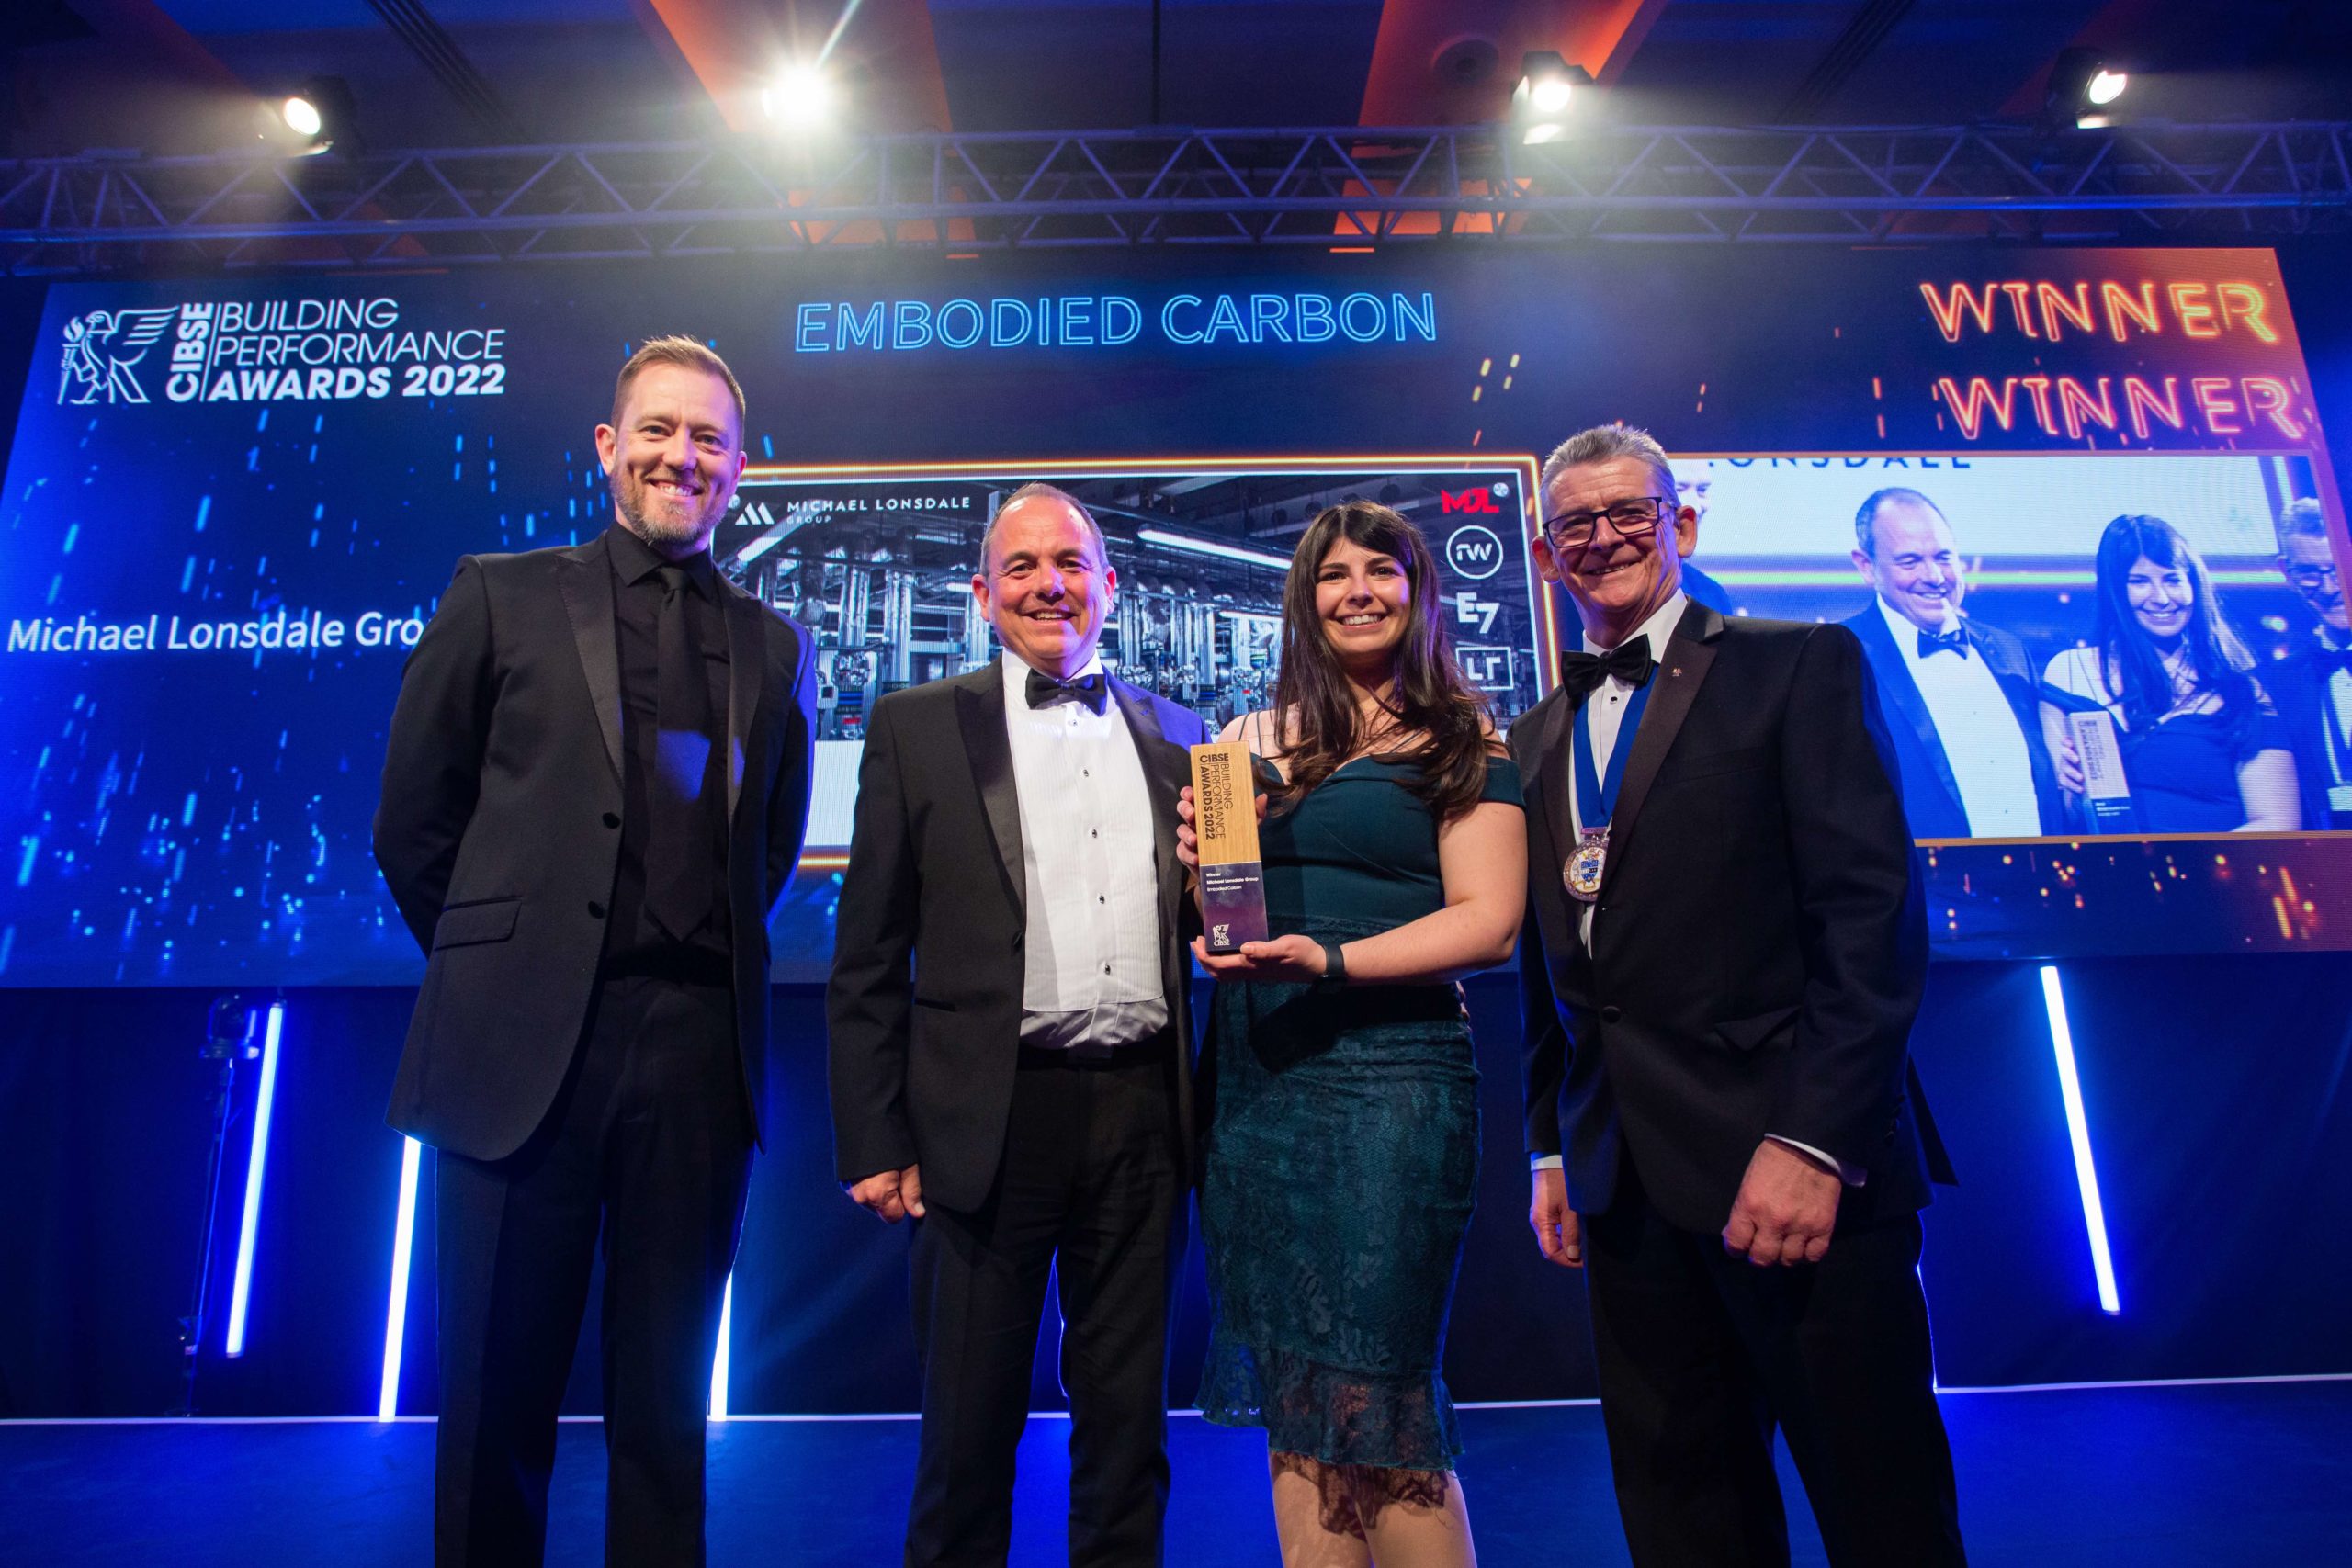 Joanna Constandis with the Embodied Carbon Award at the CIBSE Building Performance Awards 2022.